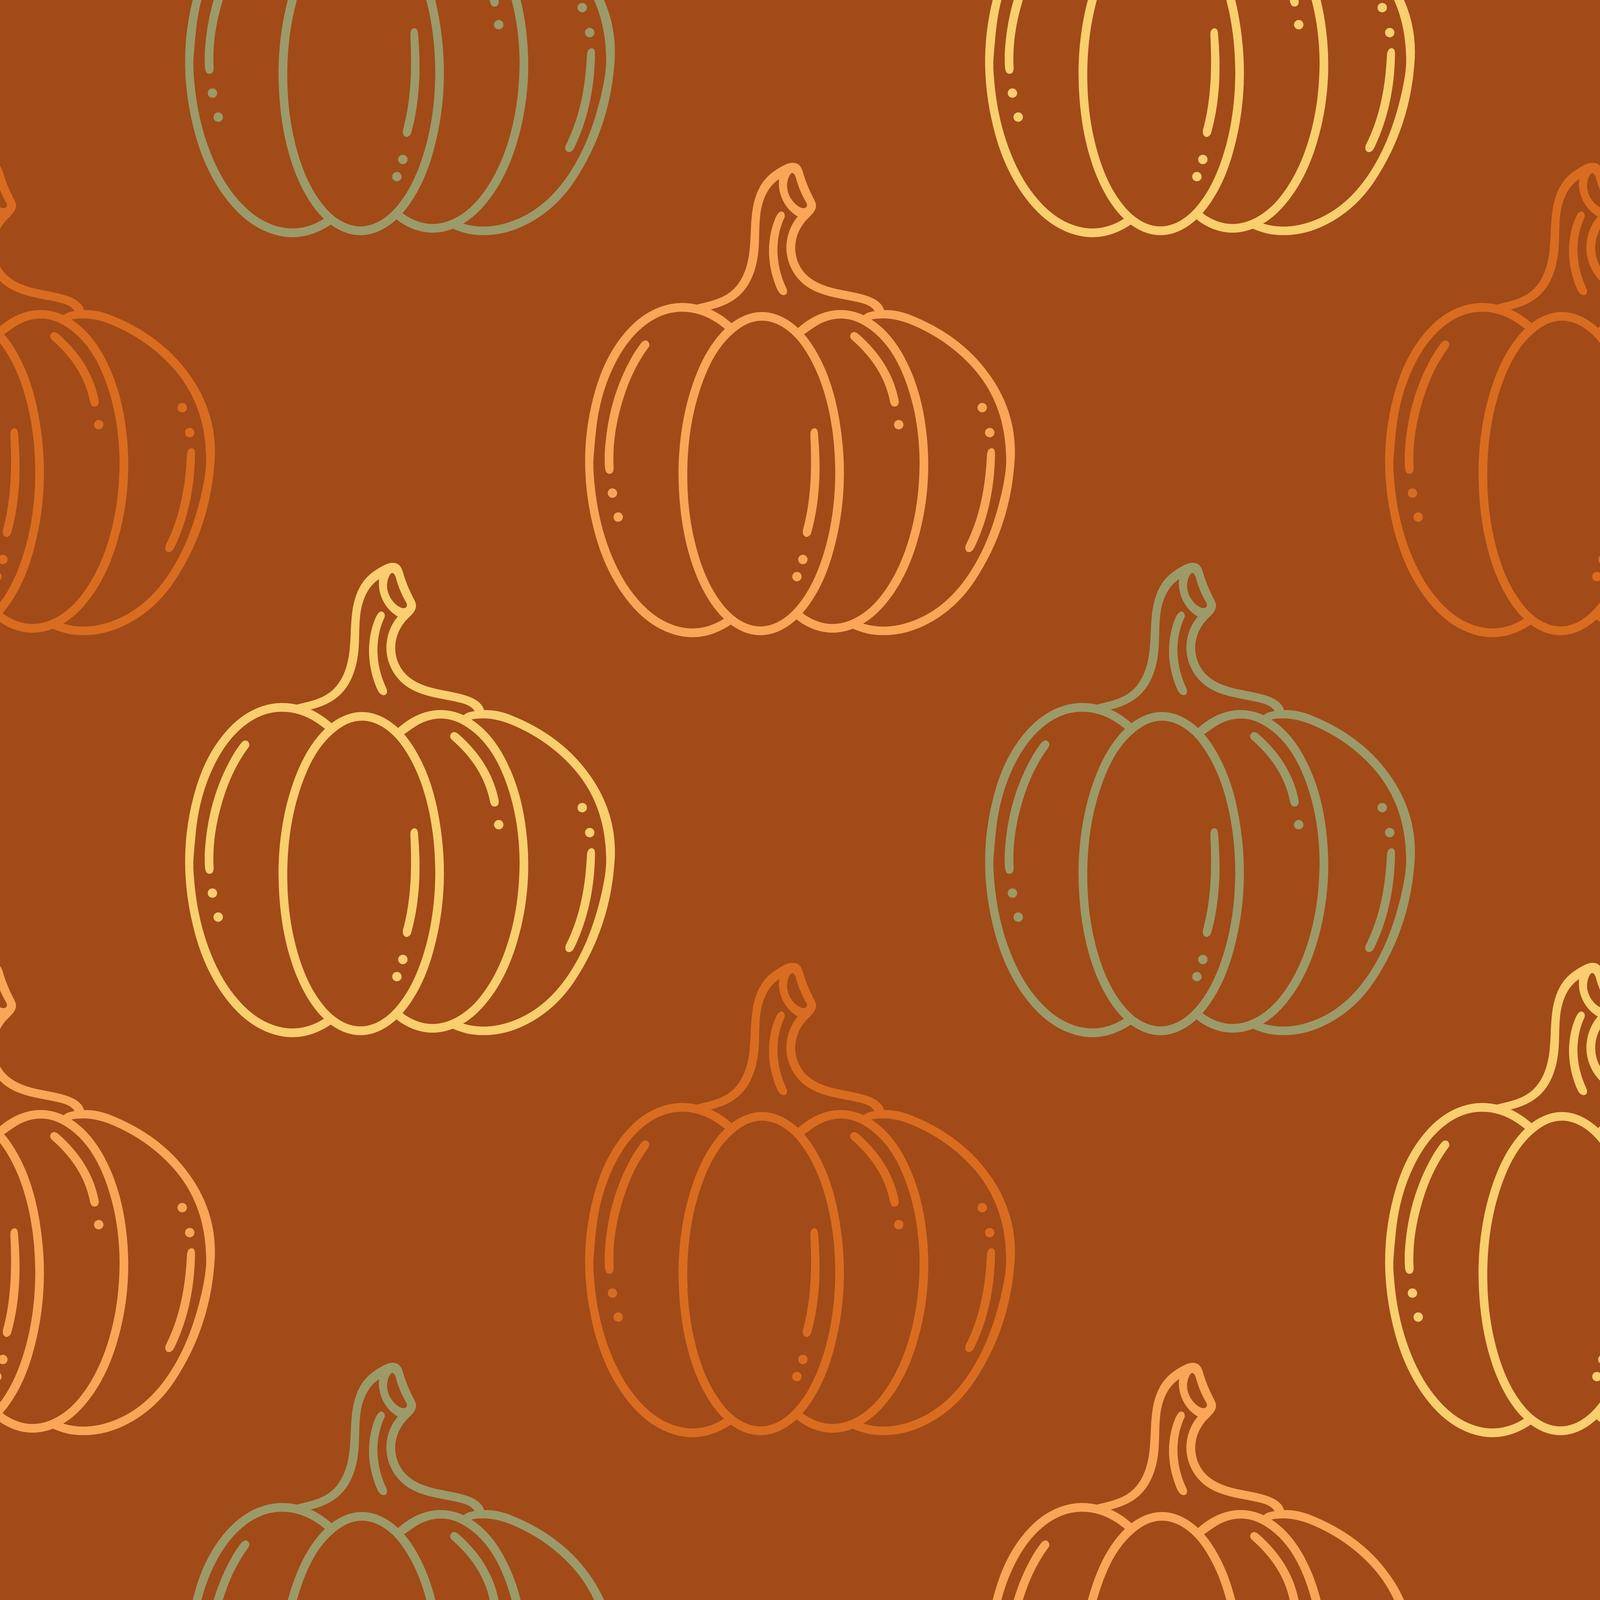 Autumn pumpkins seamless pattern. Colorful orange background with autumn vegetables vector illustration. Fall print for thanksgiving day. Template for packaging, textiles and design